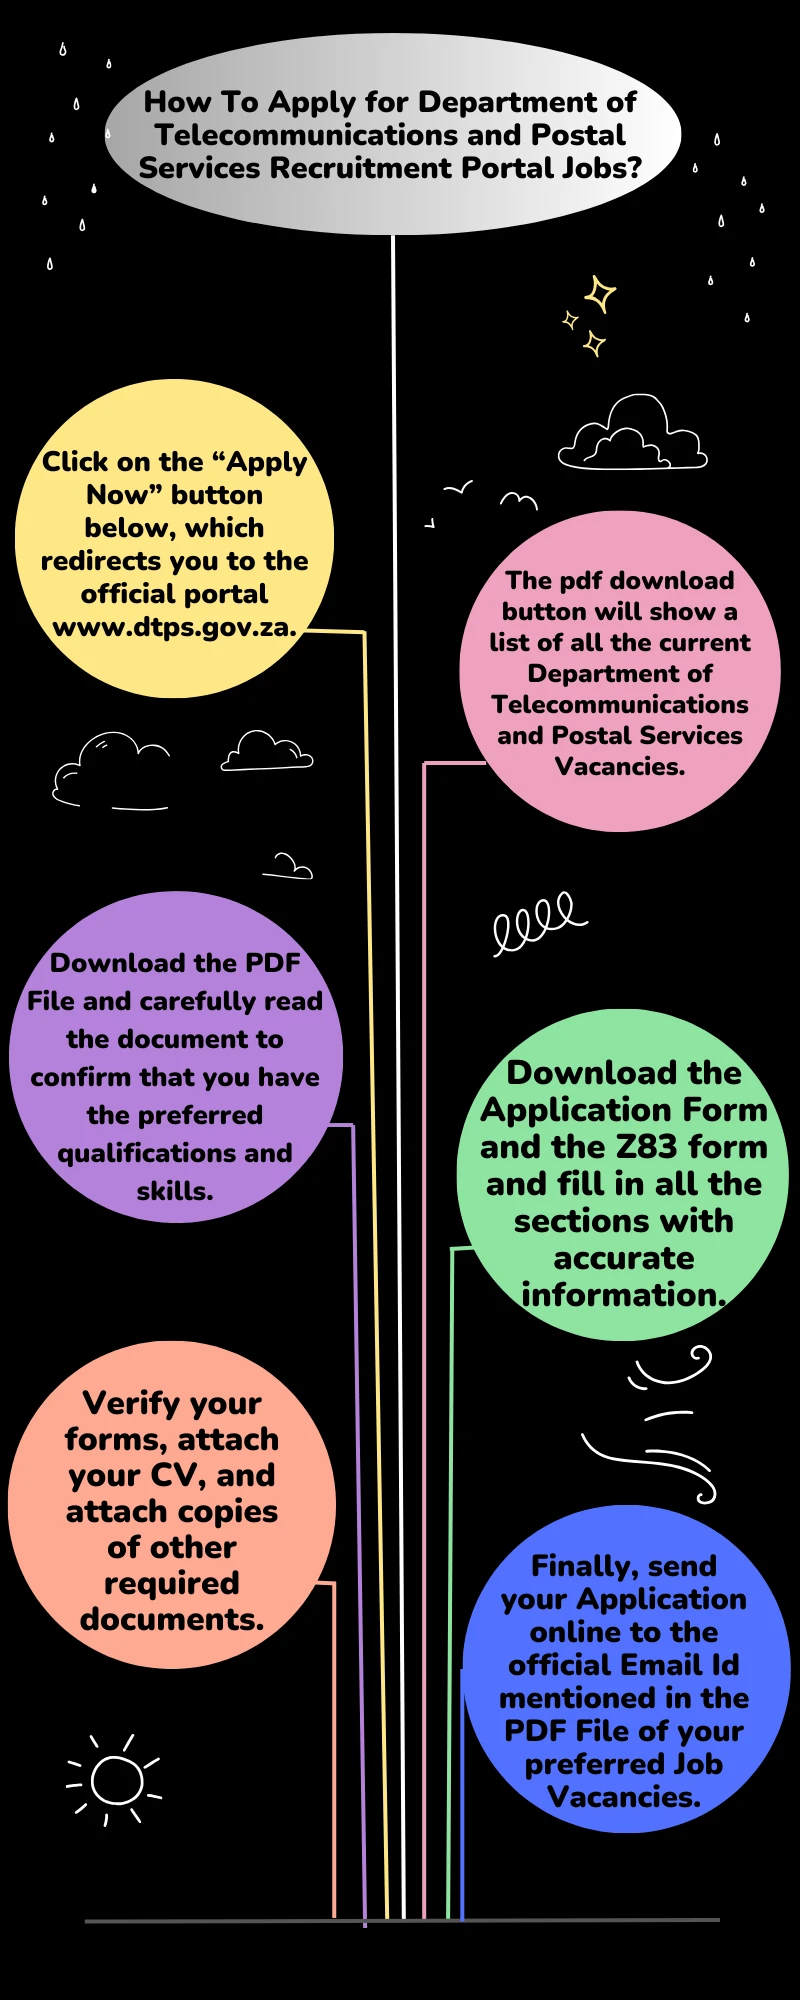 How To Apply for Department of Telecommunications and Postal Services Recruitment Portal Jobs?